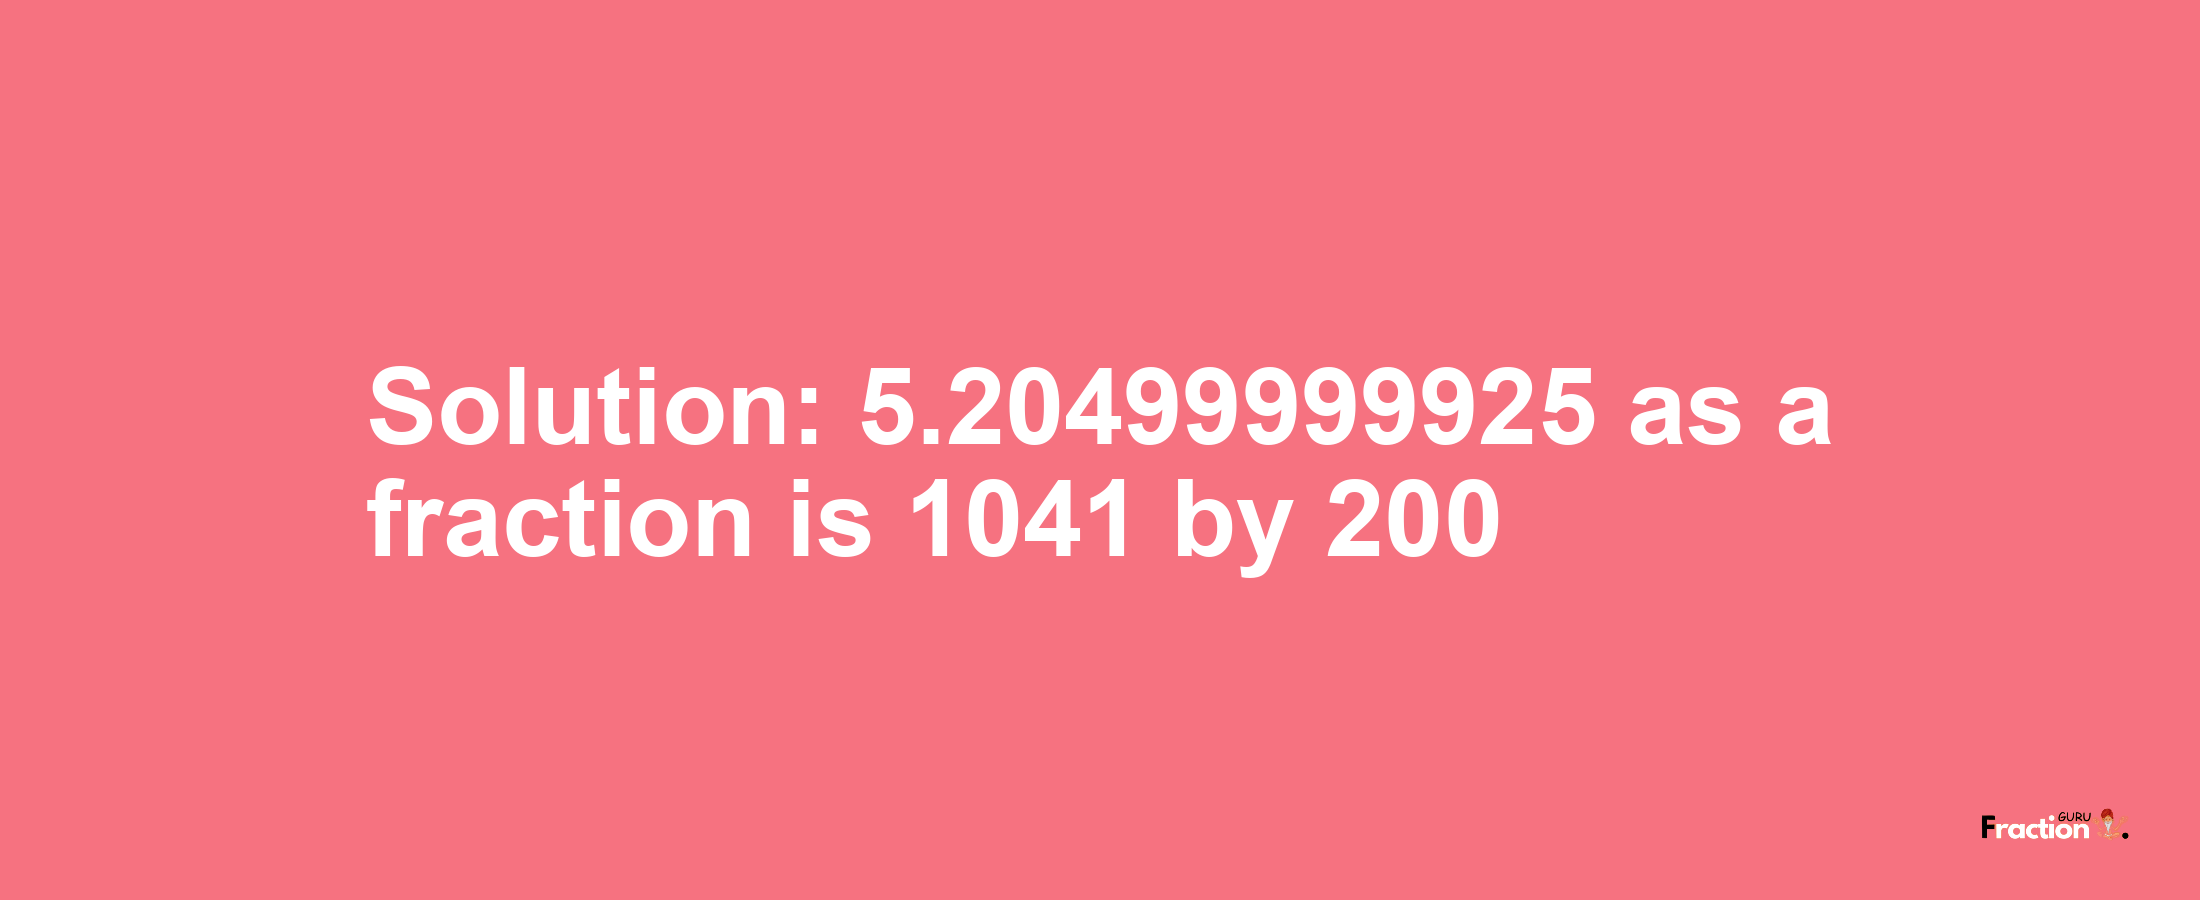 Solution:5.20499999925 as a fraction is 1041/200